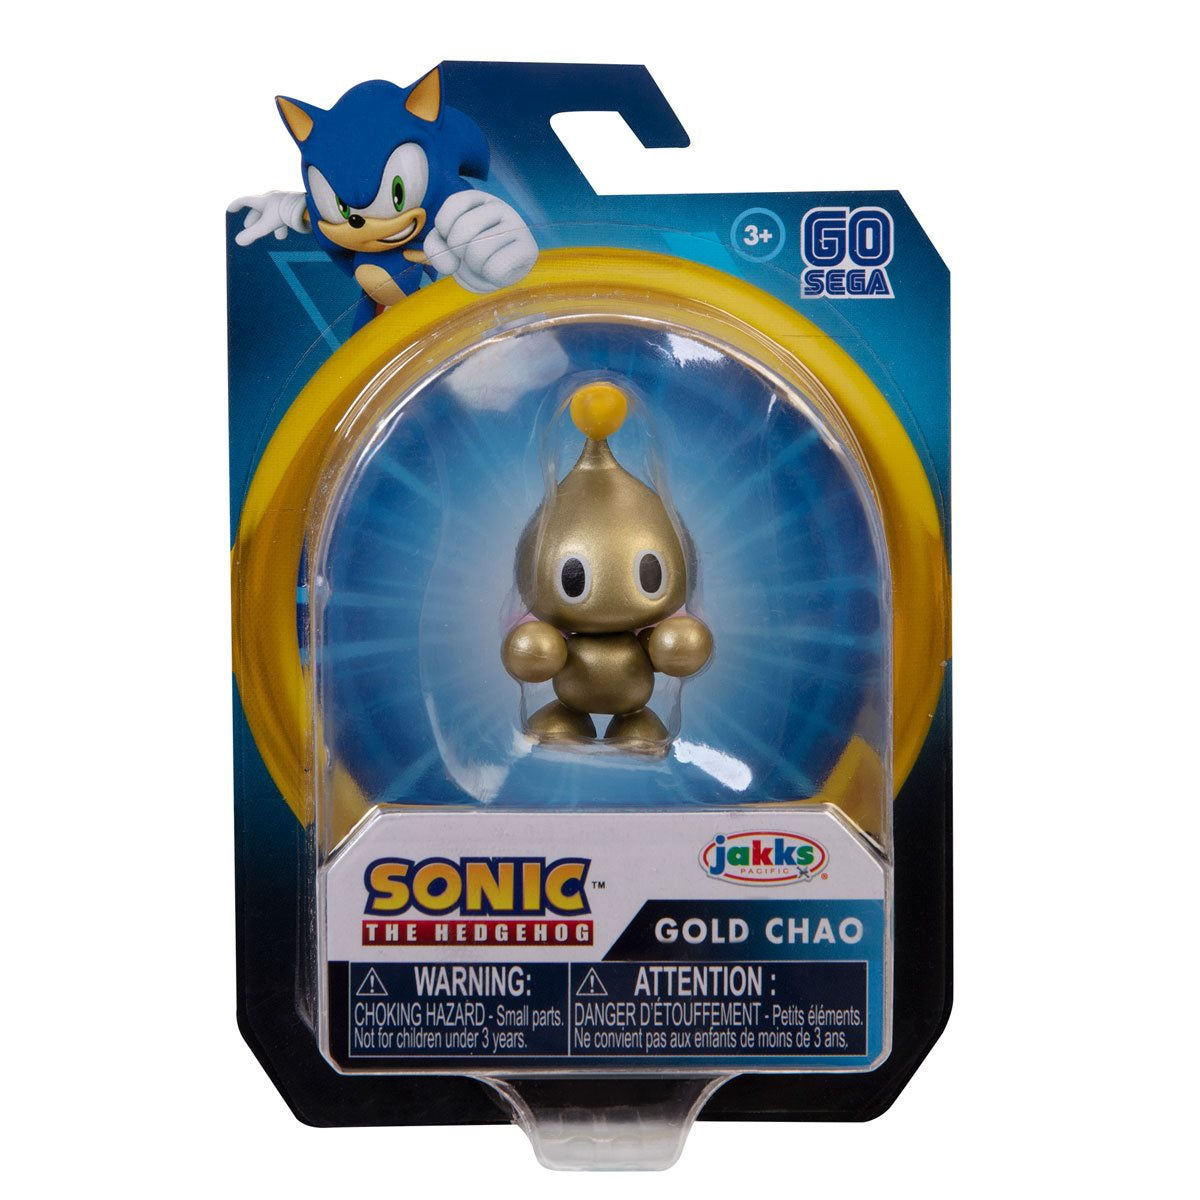 Sonic The Hedgehog - You just hatched from a Chao egg. What's your